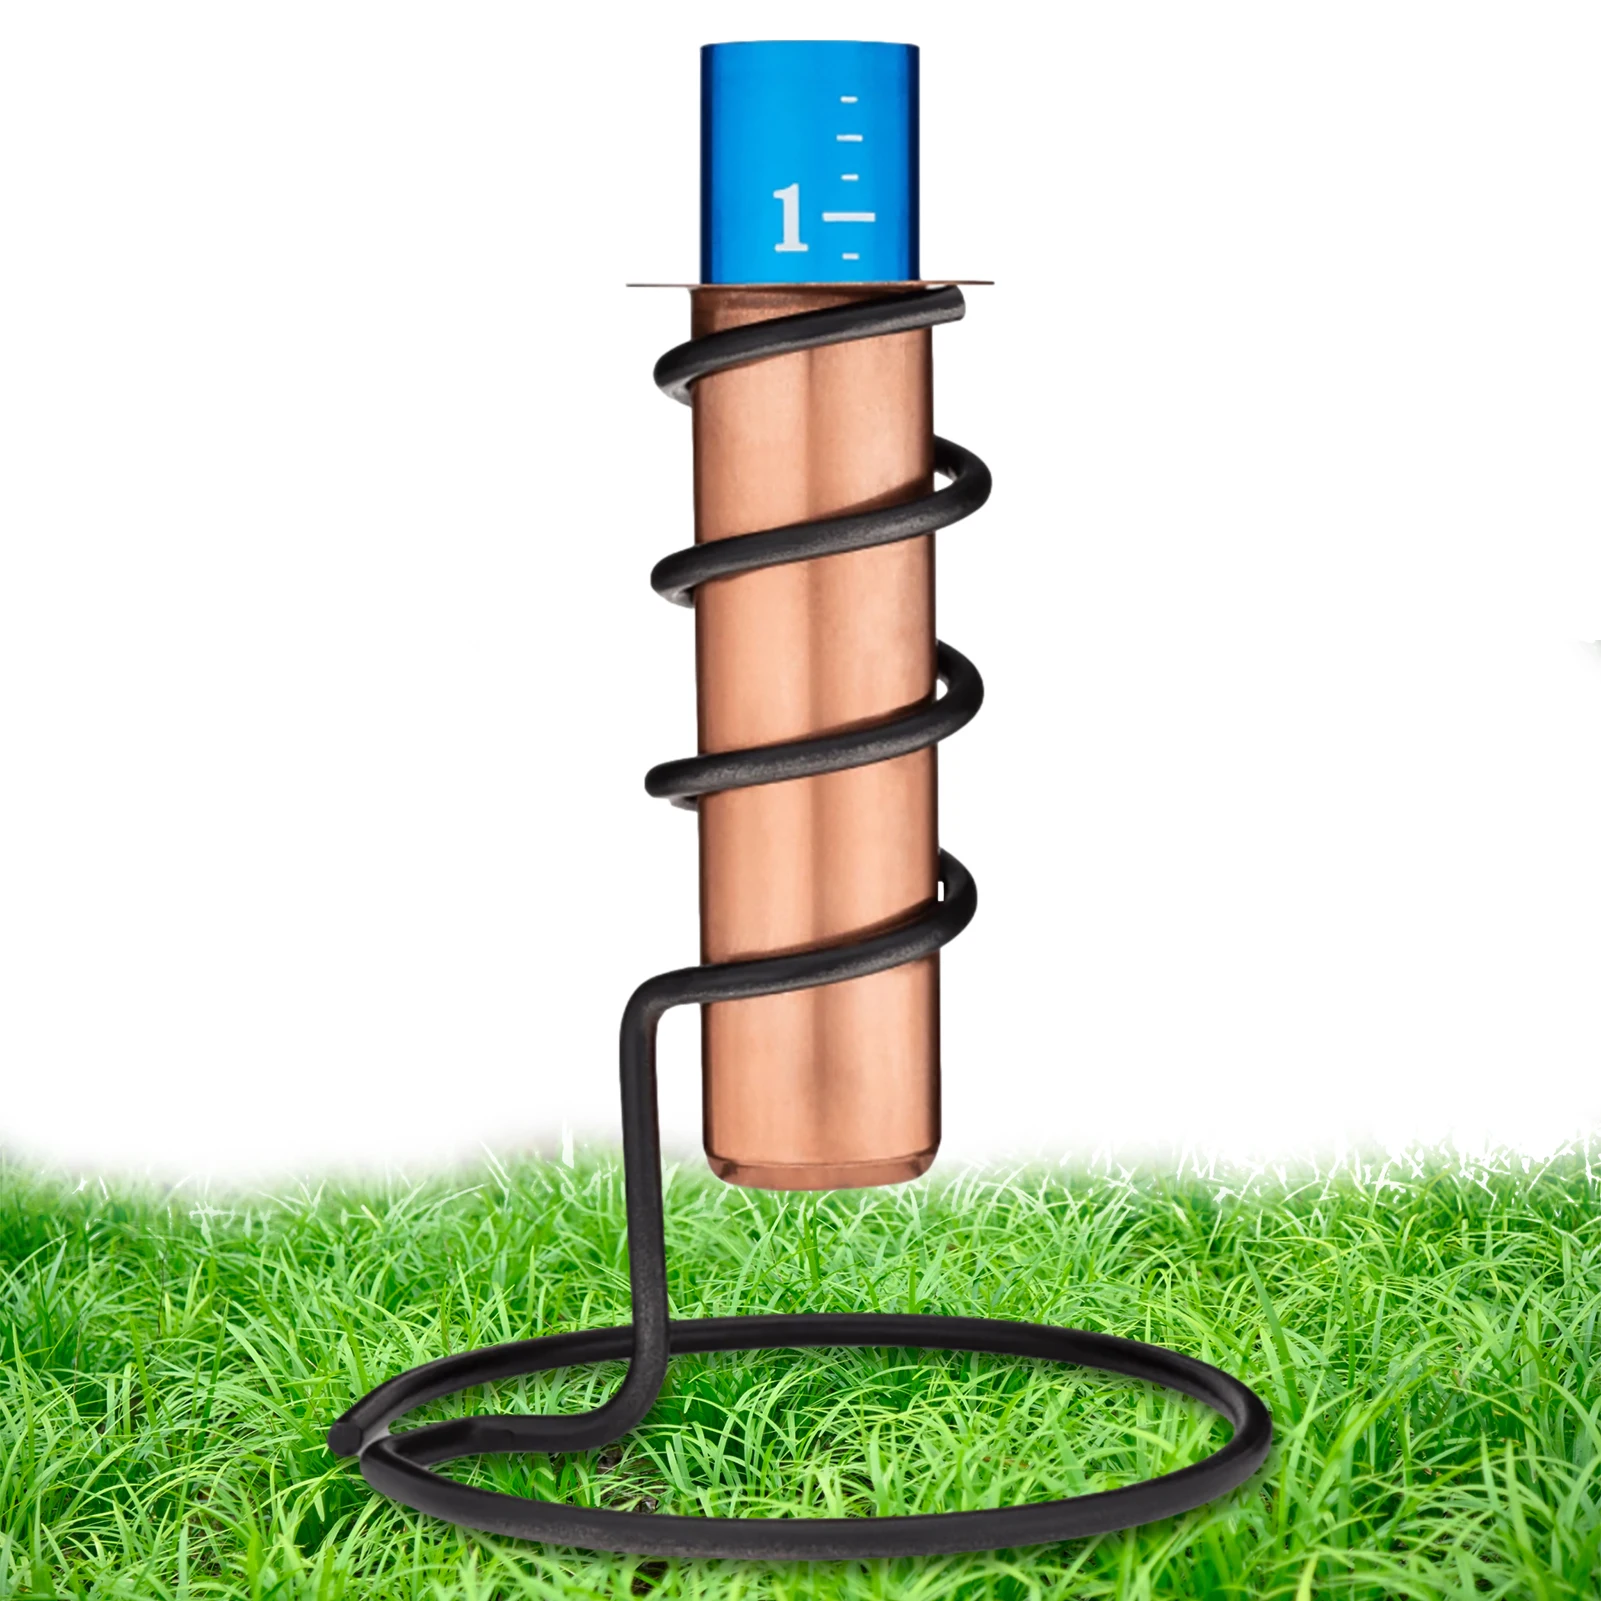 

Rain Gauge For Yard Floating Rain Gauges With Stake Durable Copper Water Rain Measure Gauges For Garden Yard Lawn Outside